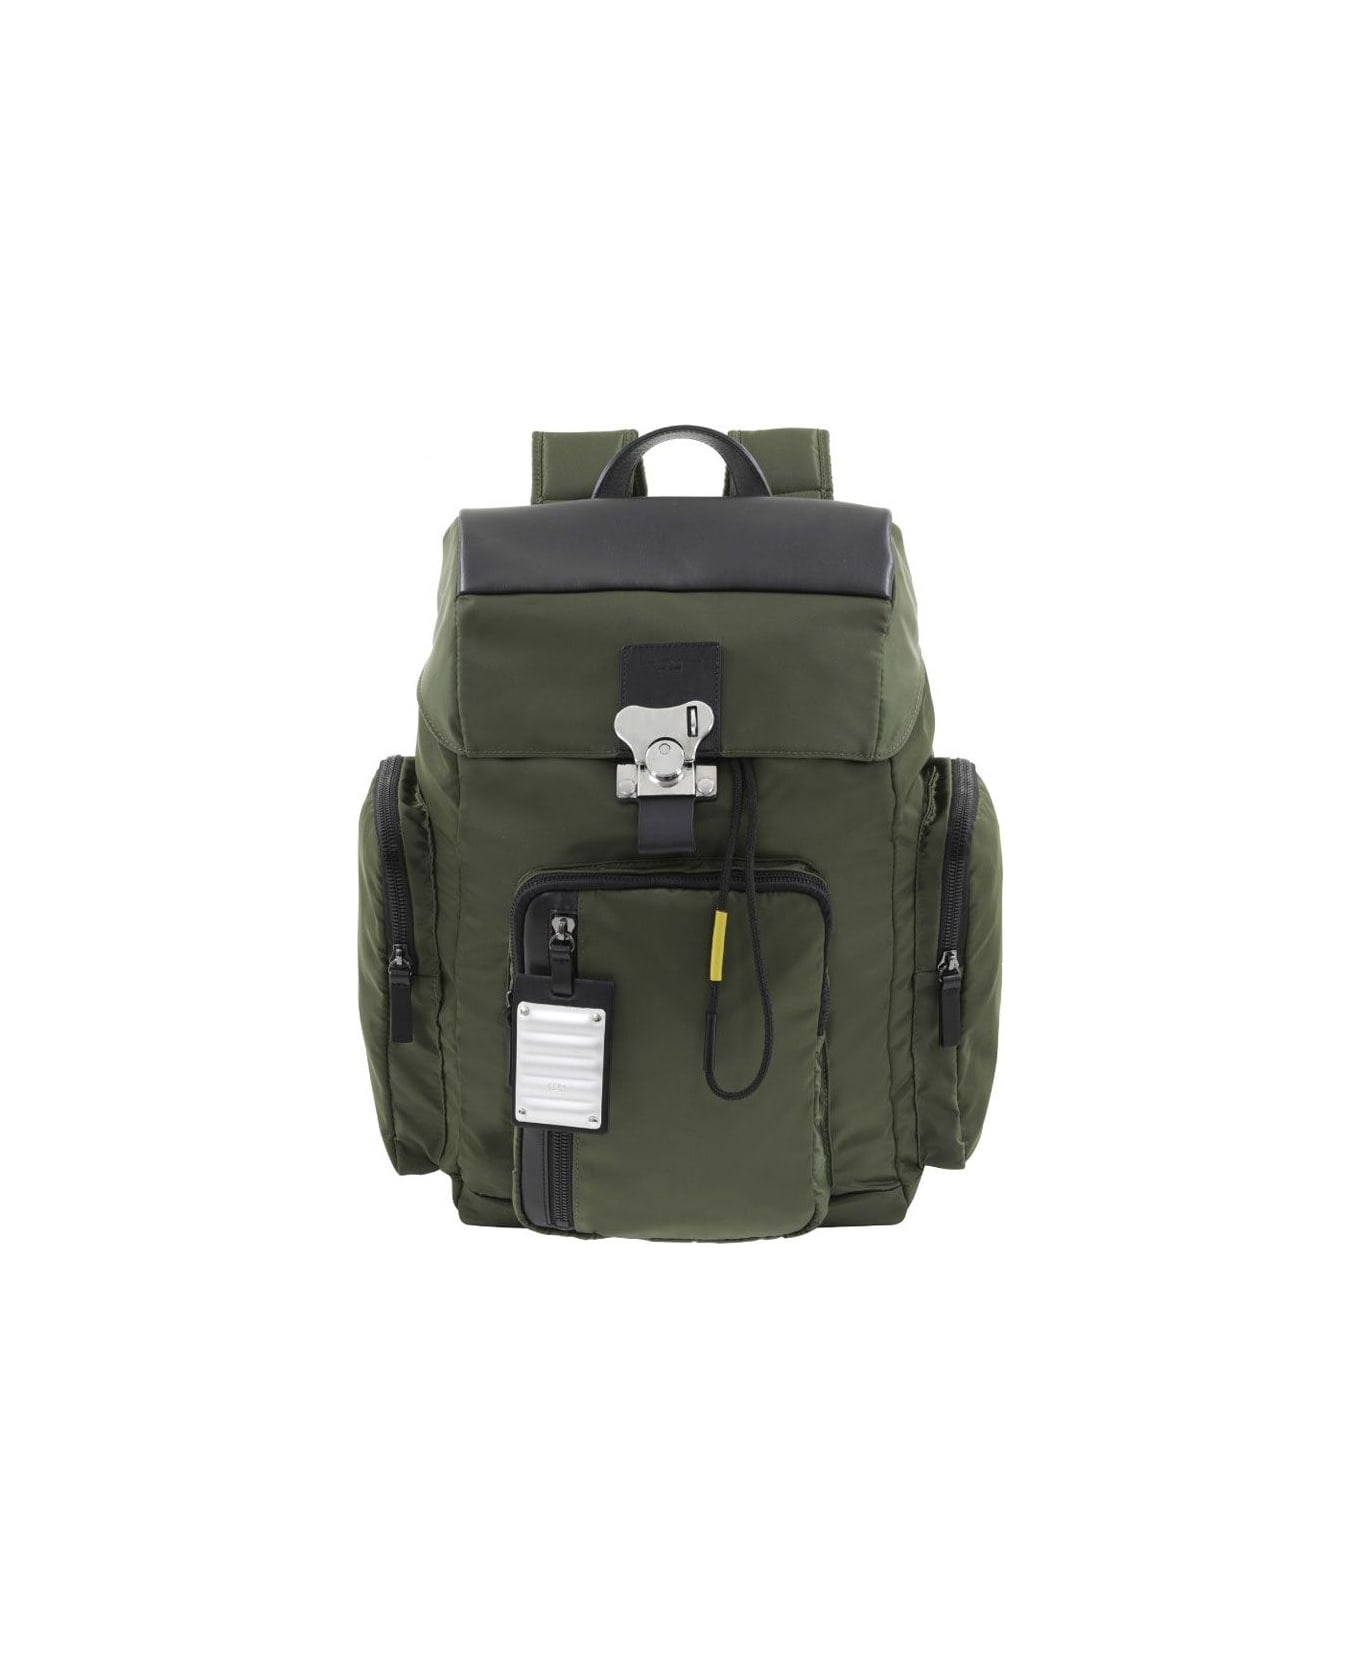 FPM Nylon Bank On The Road-butterfly Pc Backpack M - MILITARY